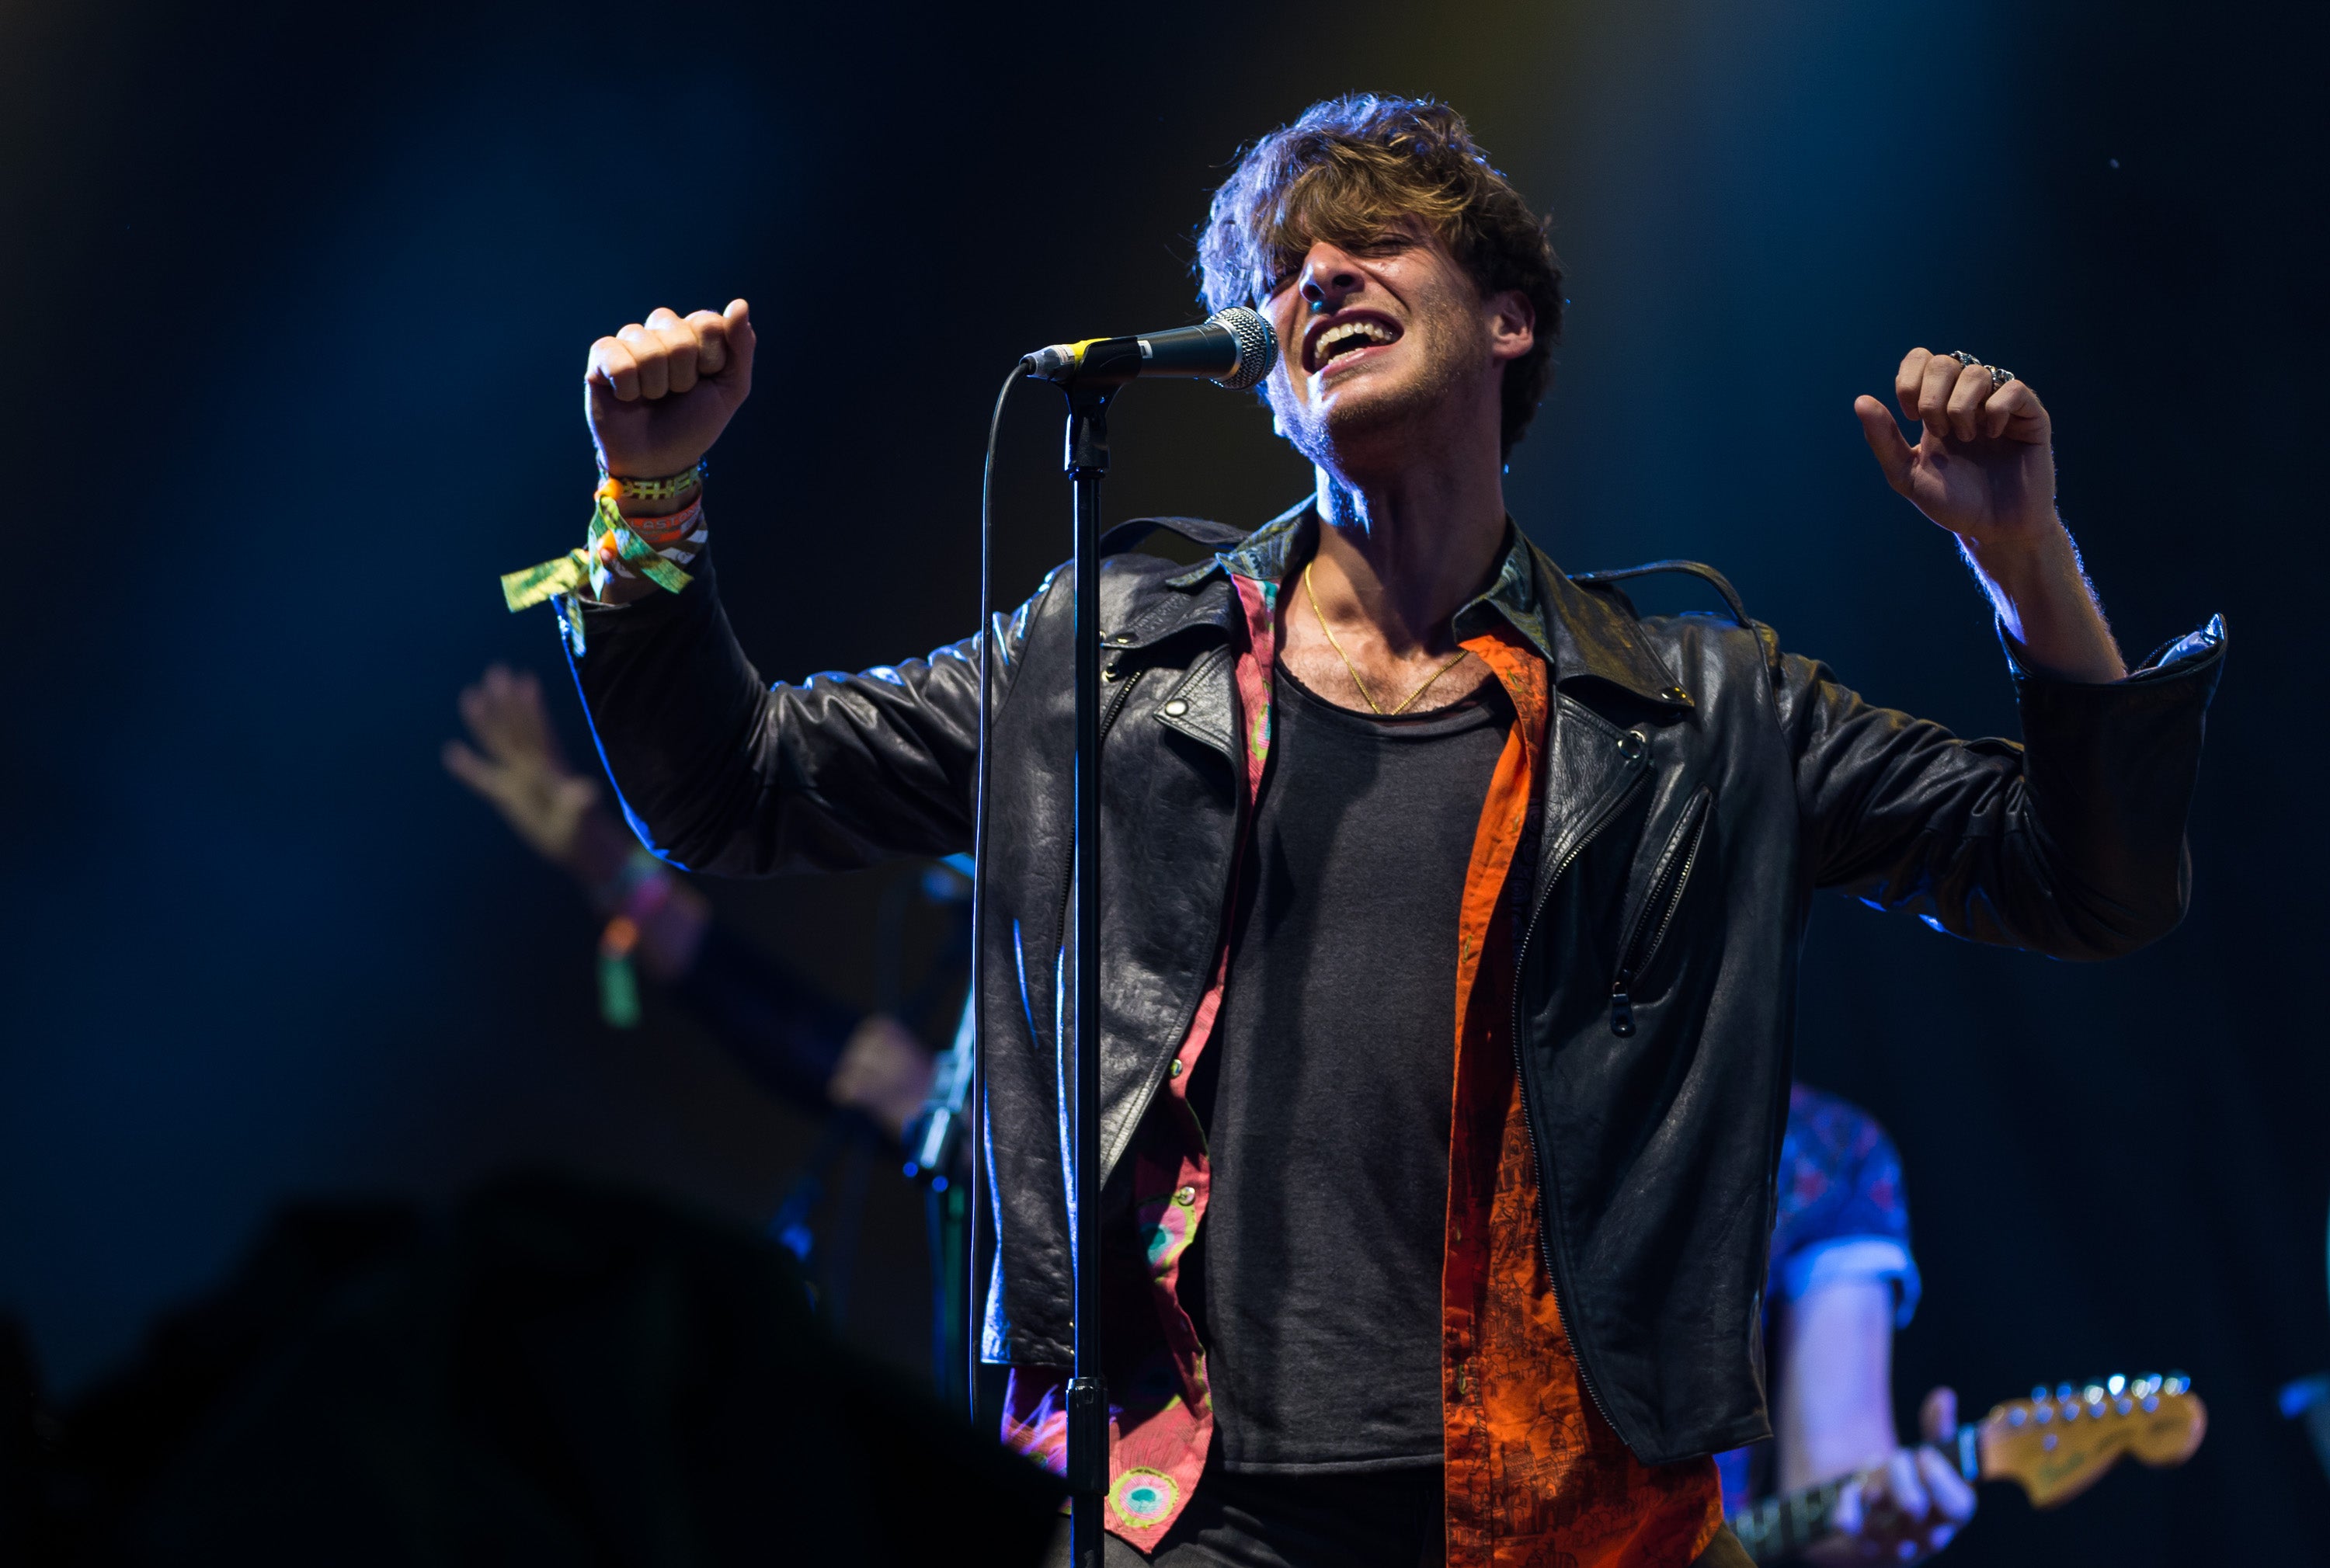 Tickets for Paolo Nutini’s UK and European tour will go on sale Wednesday 25 May